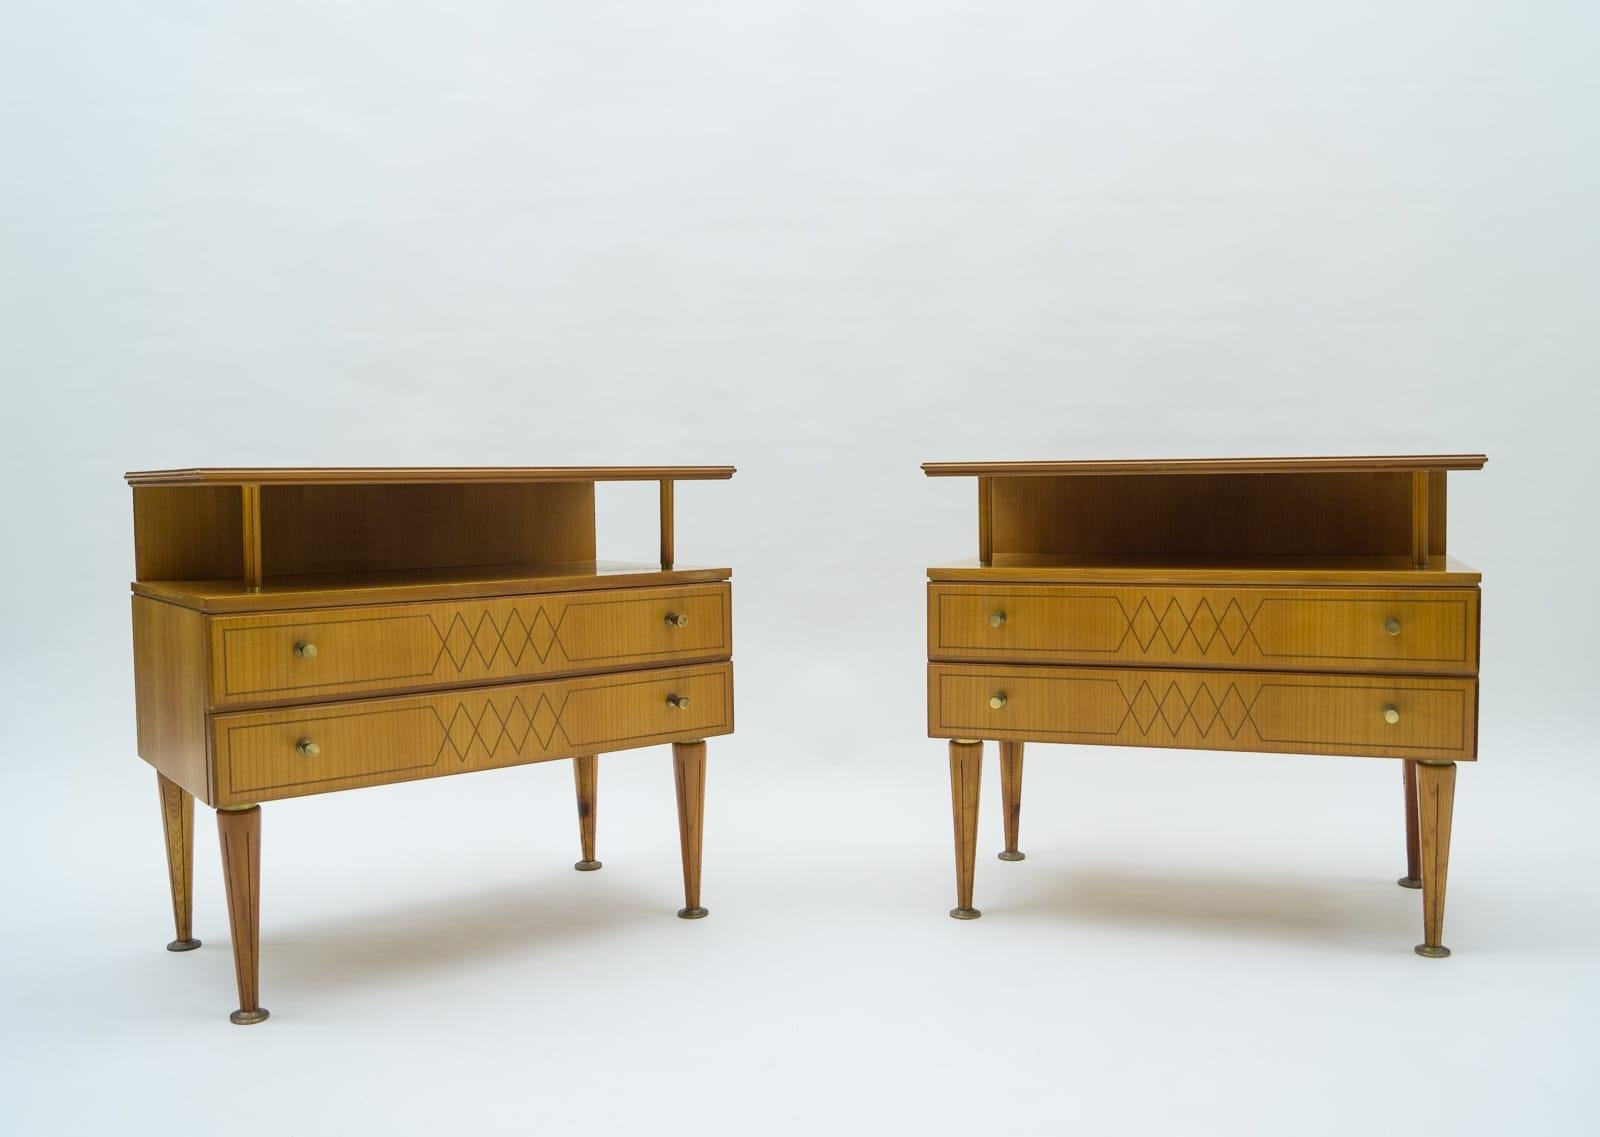 Italian Mid-Century Modern Brass and Wood Nightstands, 1950s, Set of 2 For Sale